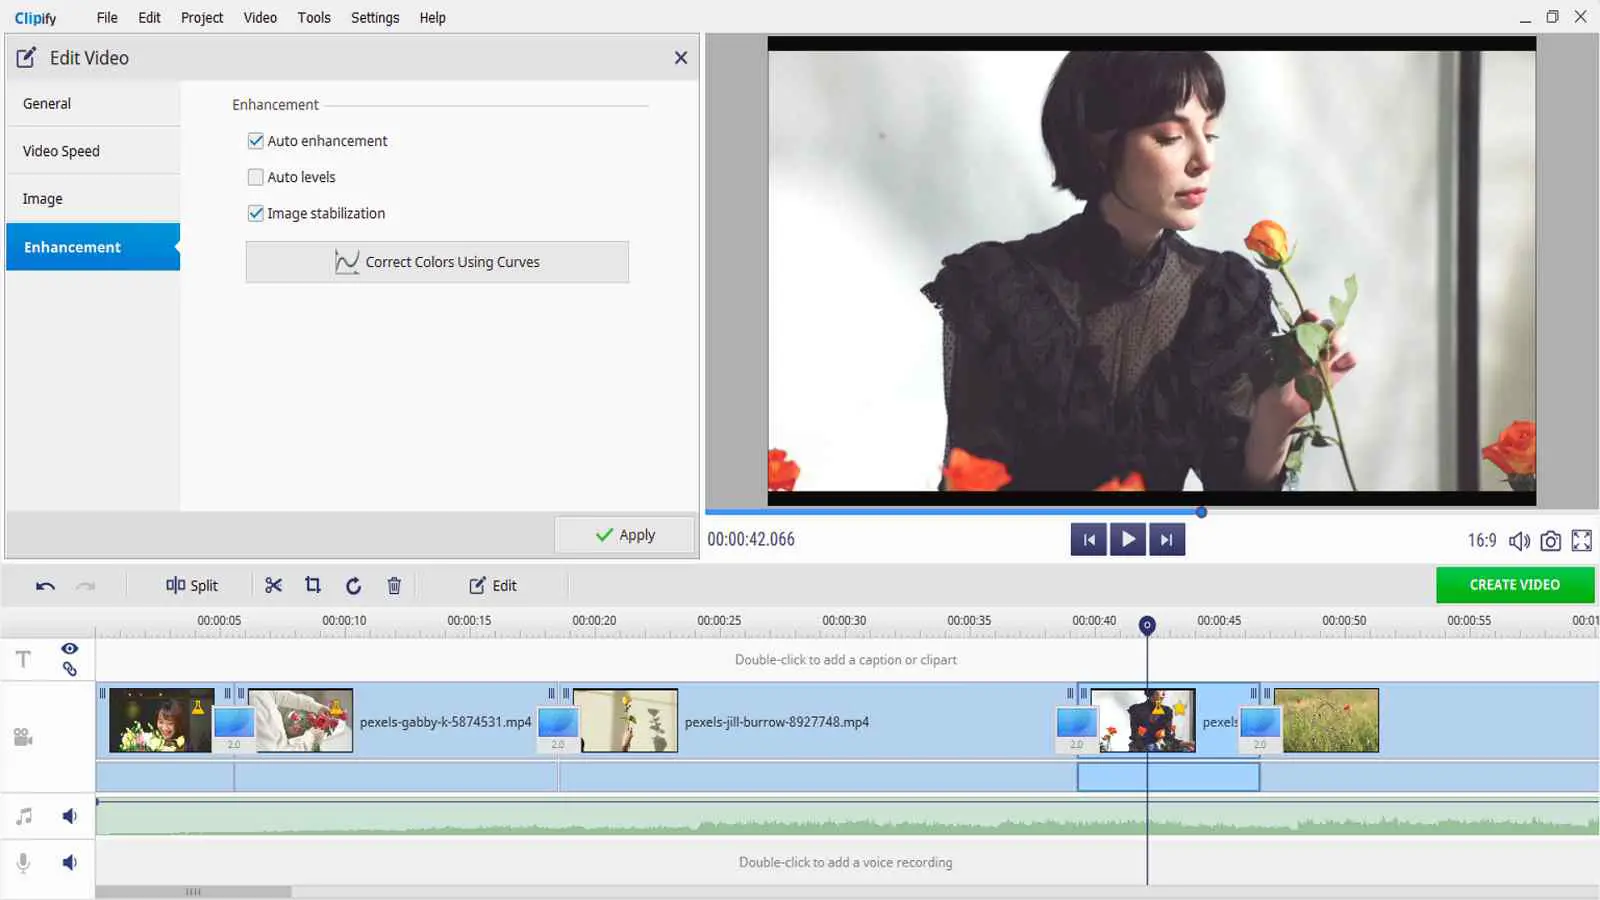 Clipify is a powerful video editor with broad functionality and an intuitive interface designed to be accessible to users with little or no video editing experience.